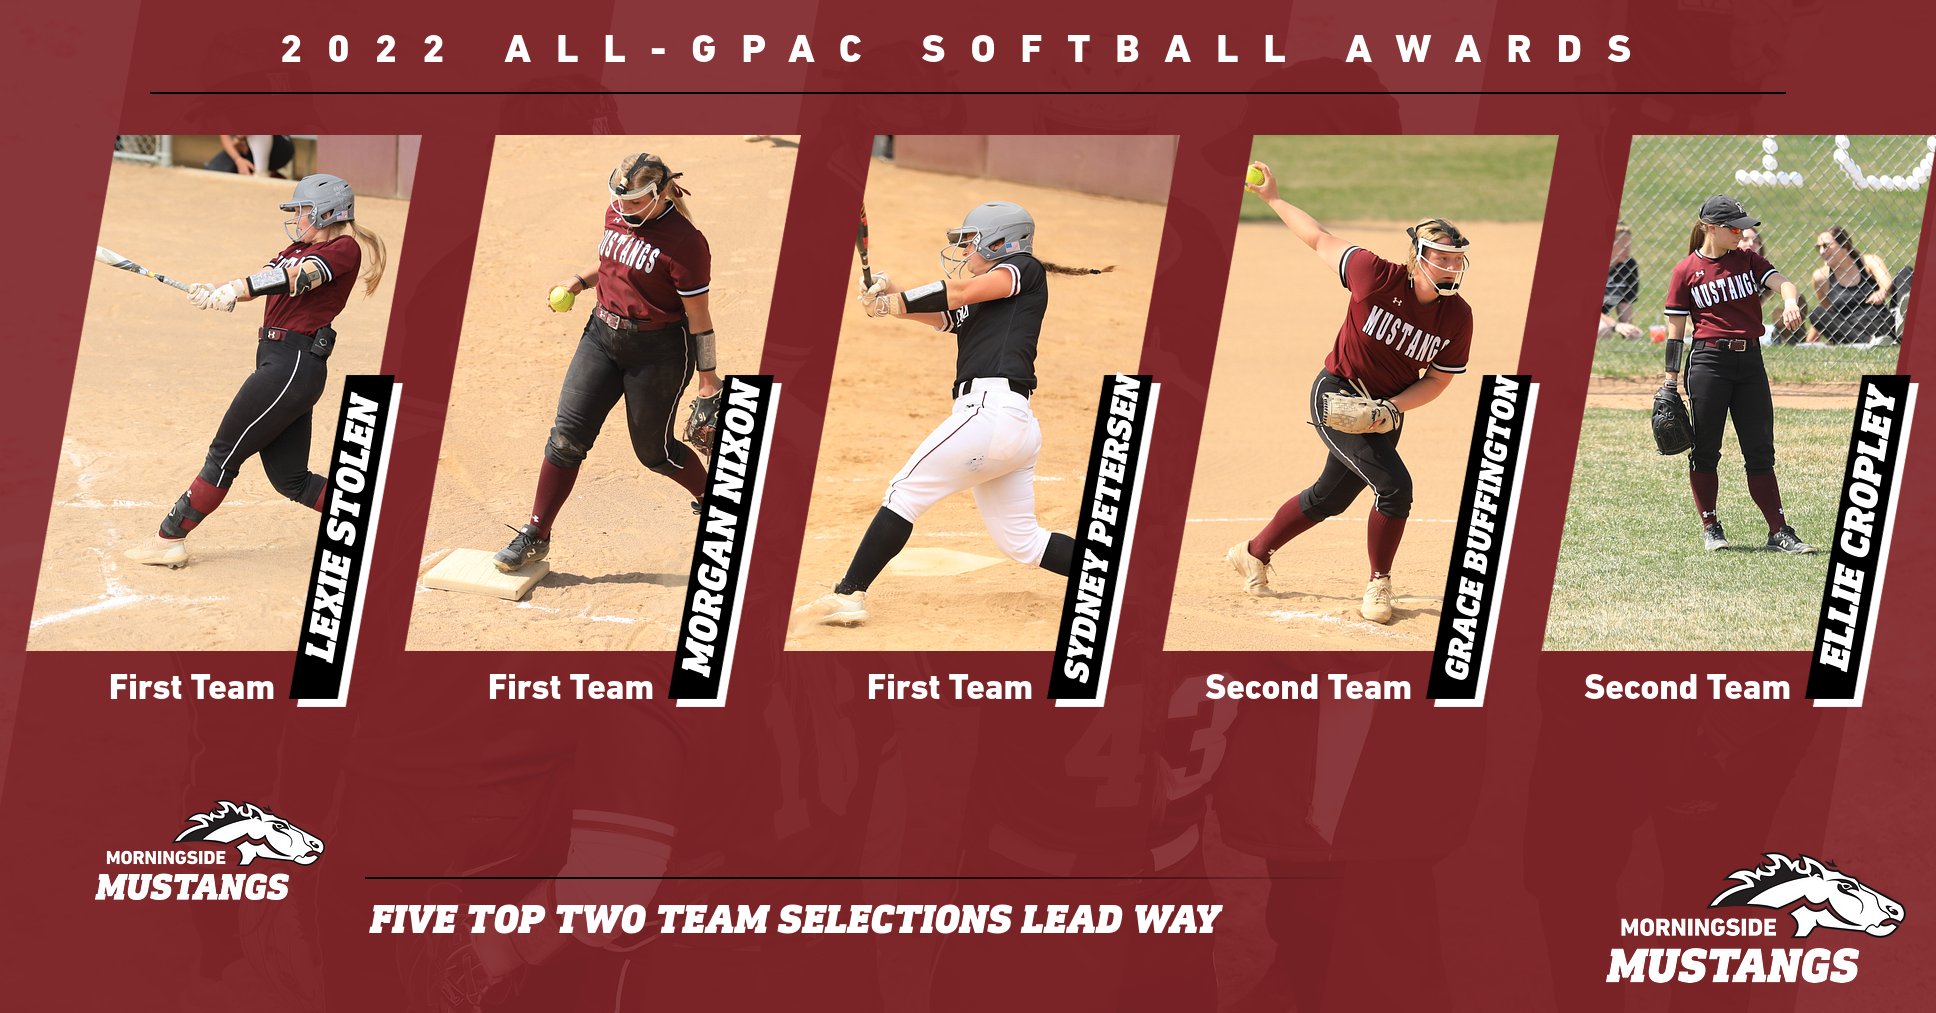 Morningside well-represented on 2022 All-GPAC awards